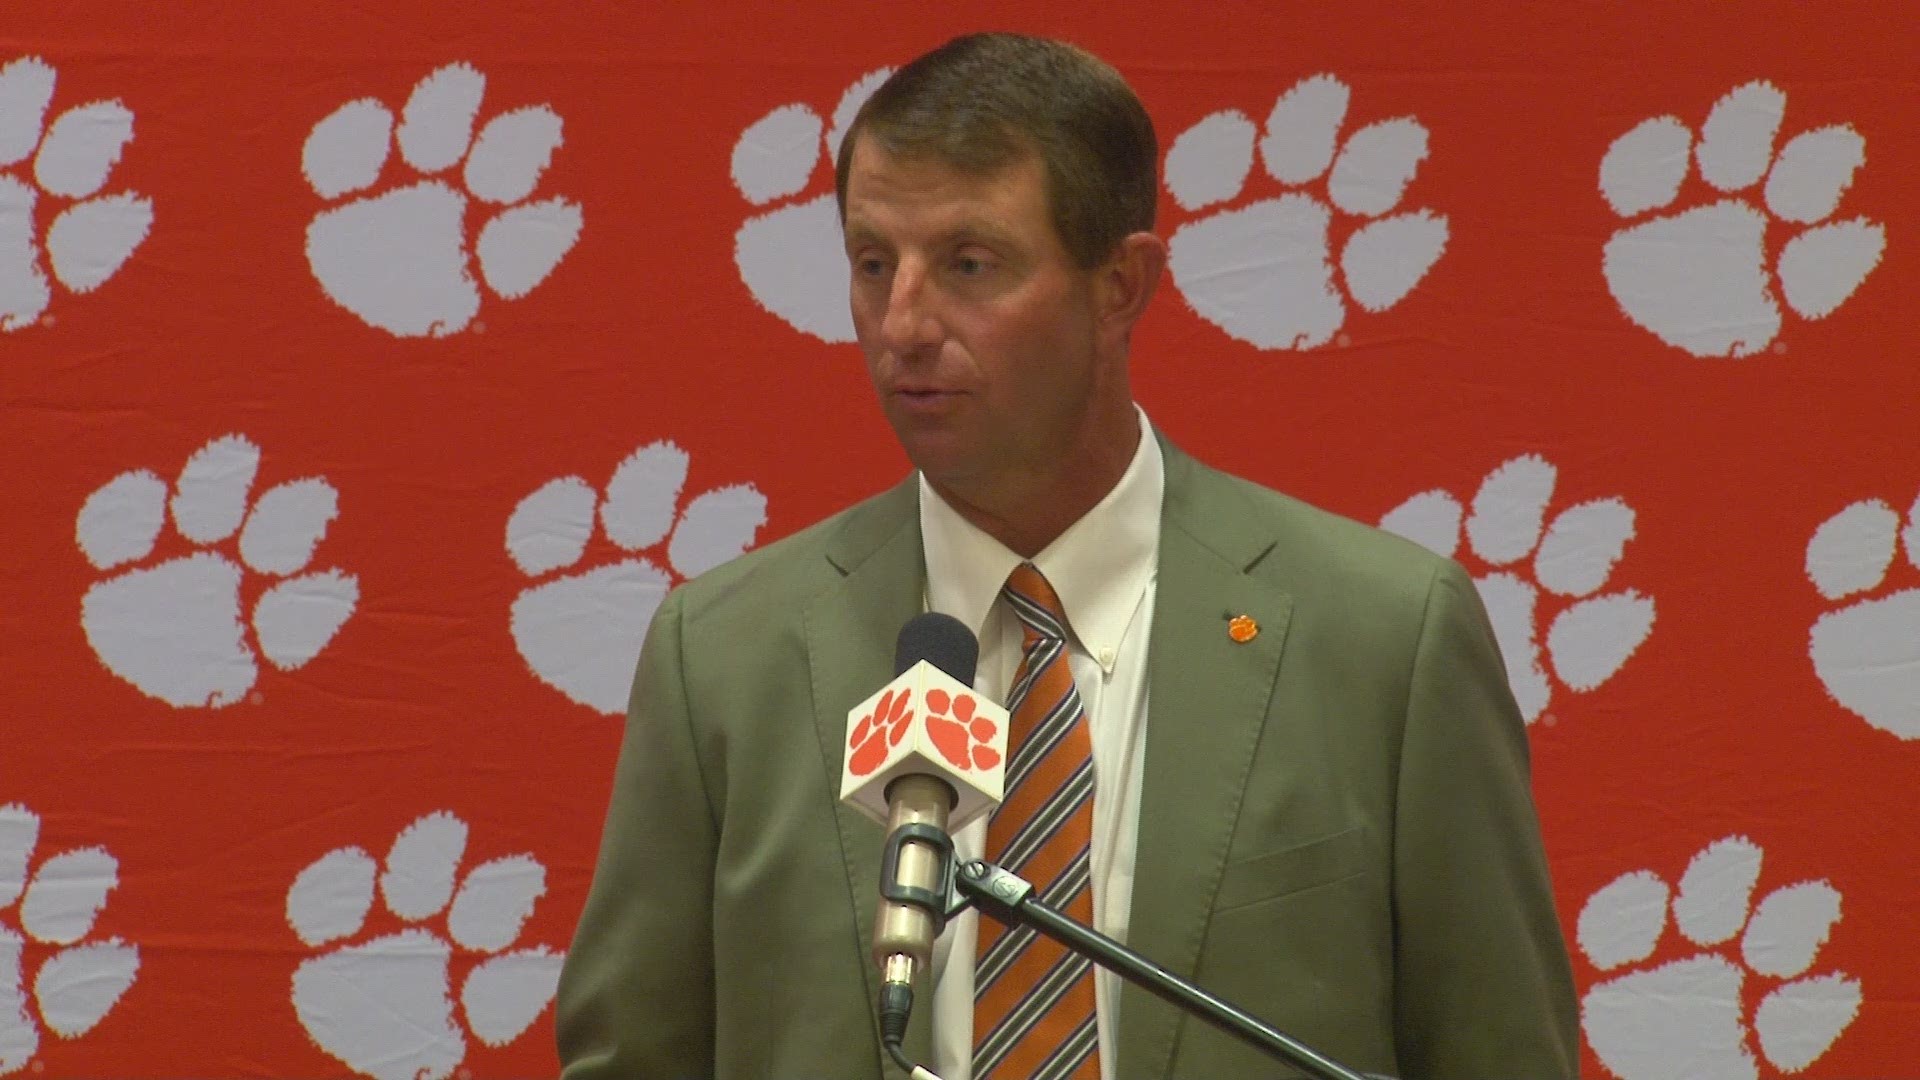 Clemson's head coach talks about what stood out to him following the Tigers' 48-7 season opening win over Furman at home.